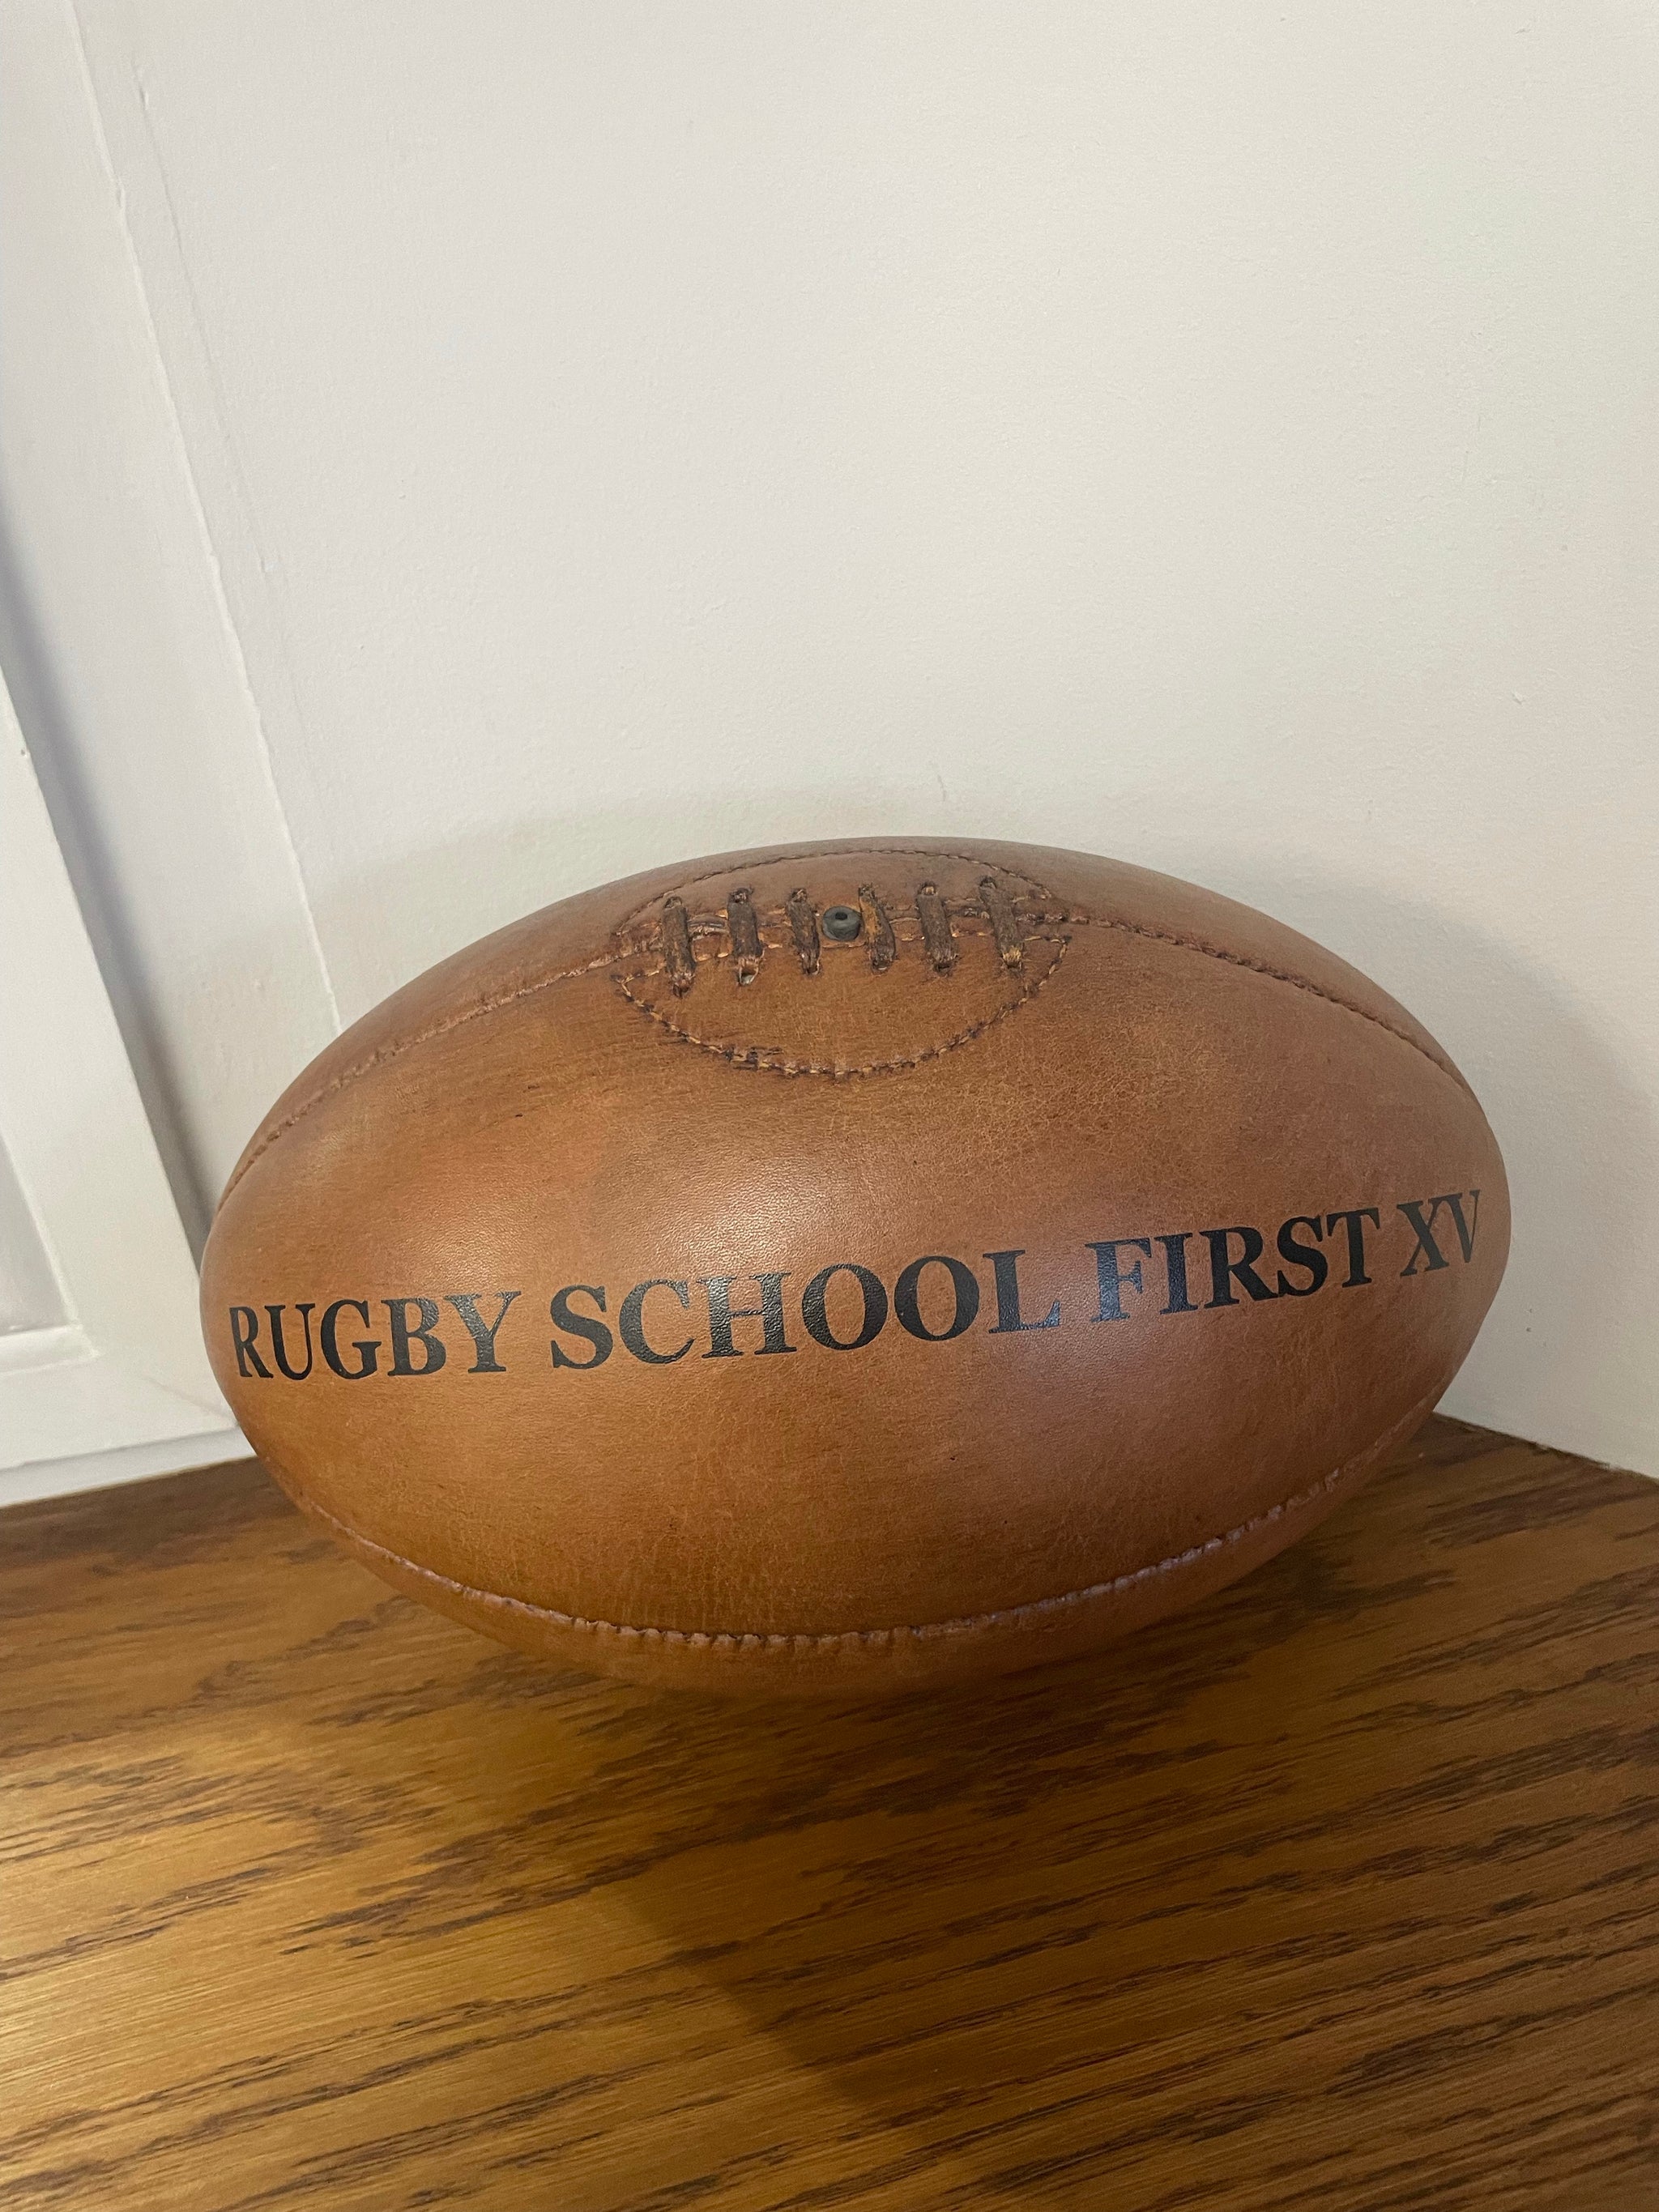 Vintage Style Rugby Ball - 2 sizes